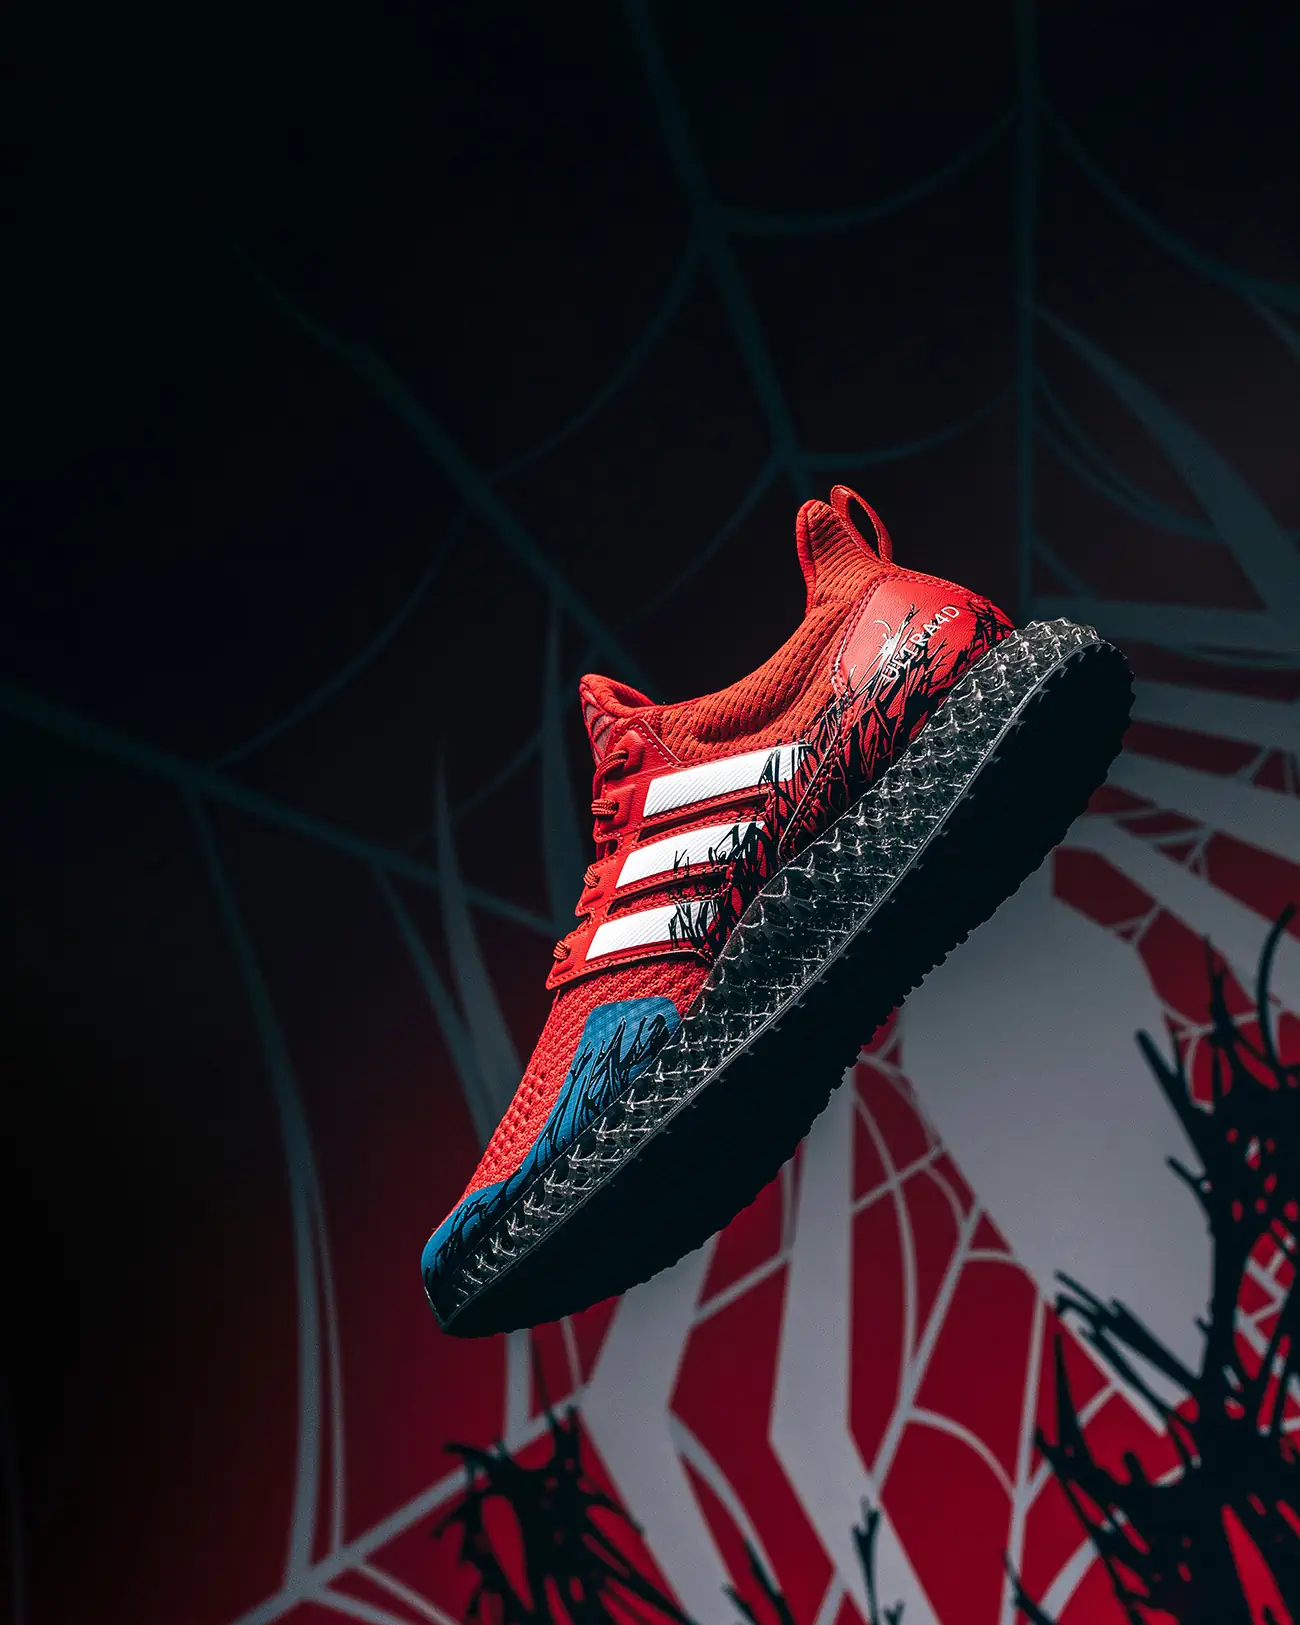 Stepping into Spider-Man's shoes with adidas' new collection